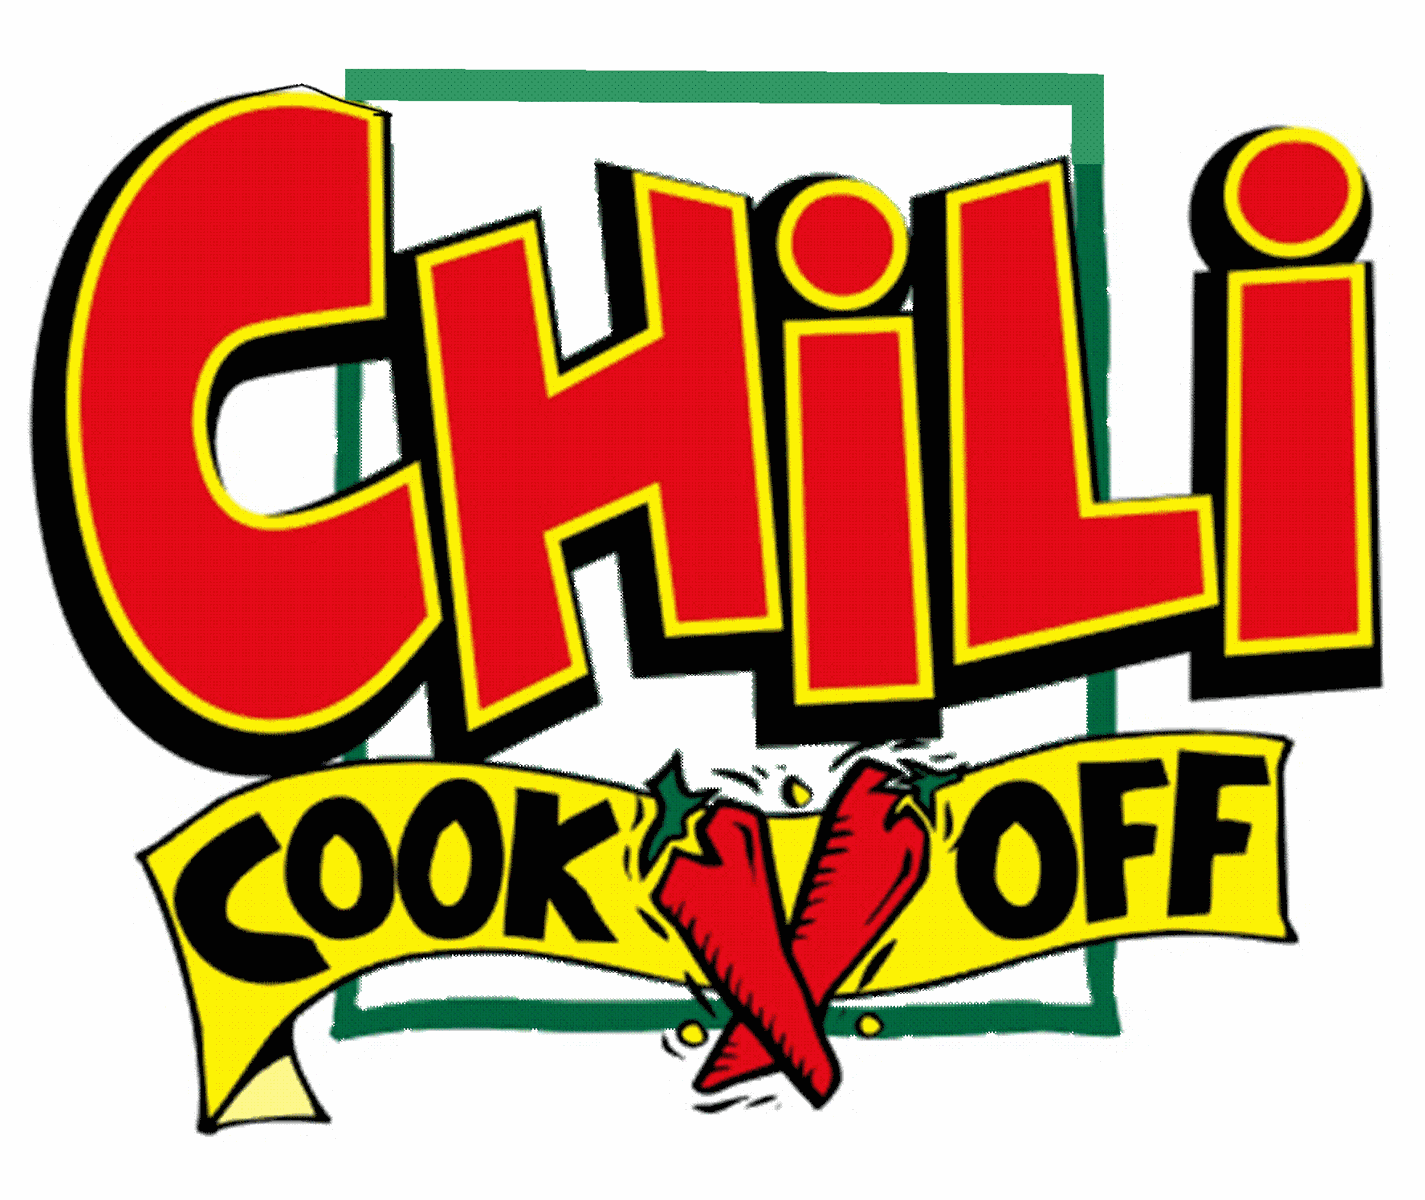 Chili Cook Off Award Certificate Template Cliparts co